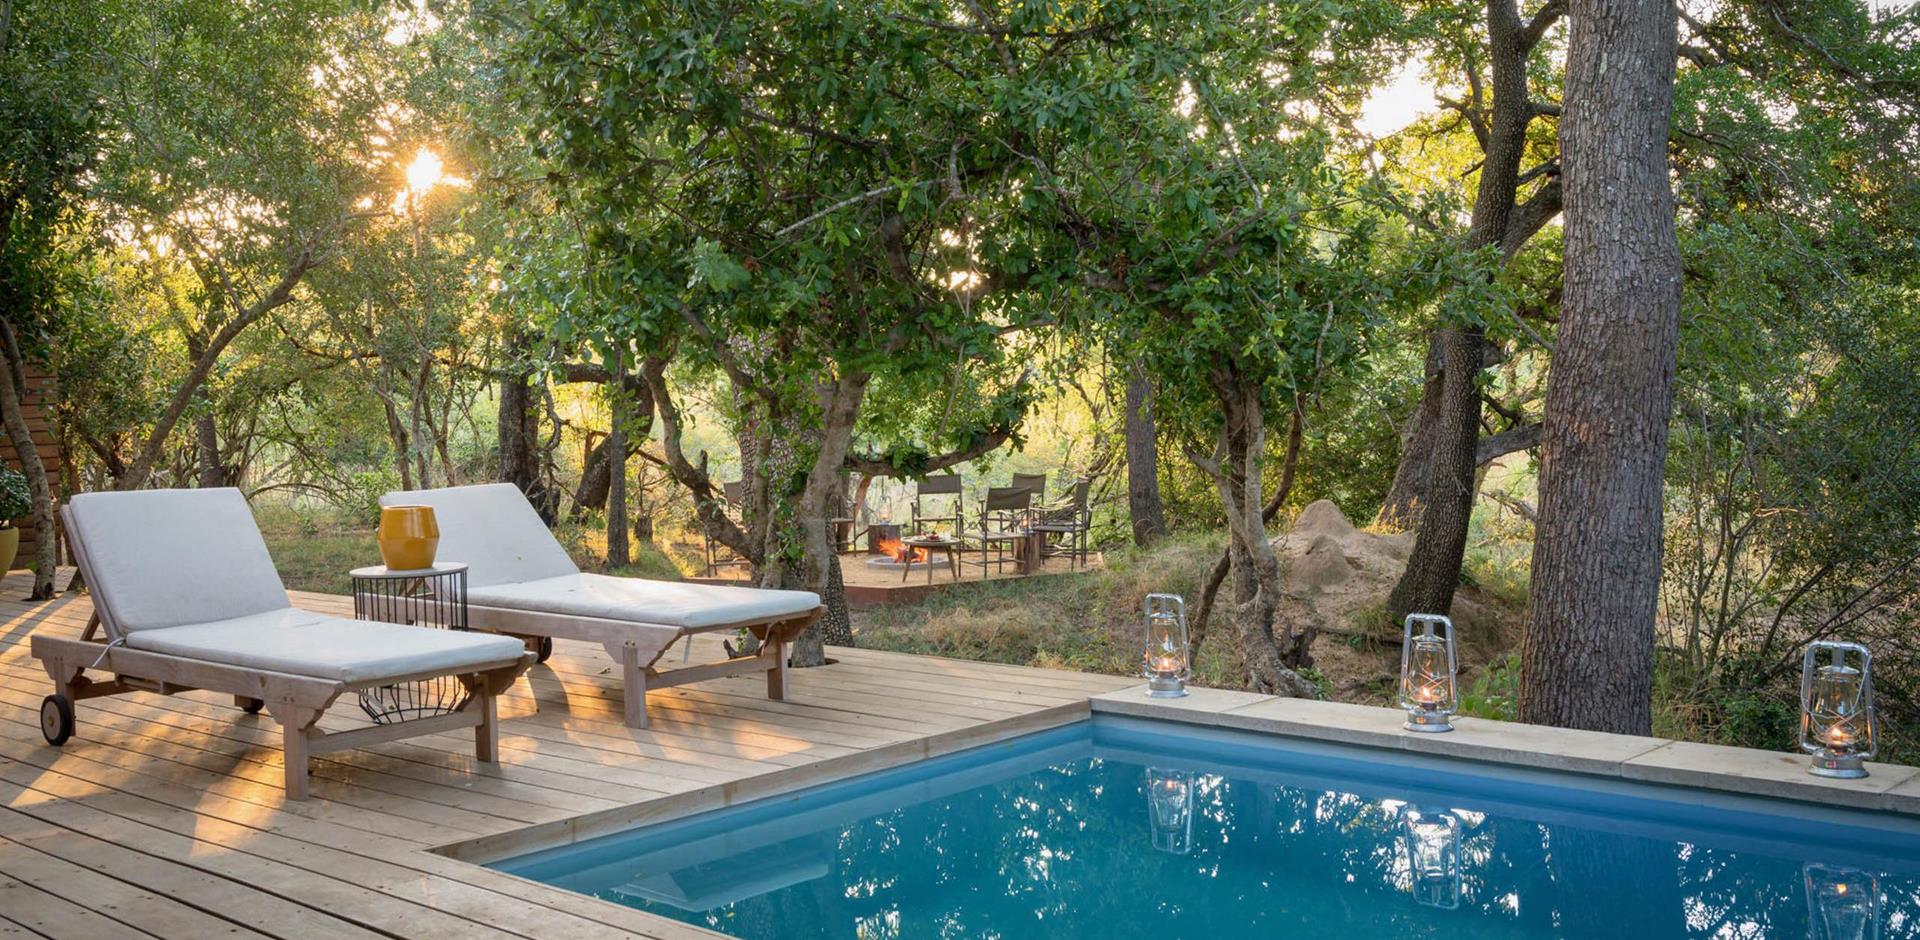 Pool loungers, Waterside at Royal Malewane, Greater Kruger National Park. South Africa